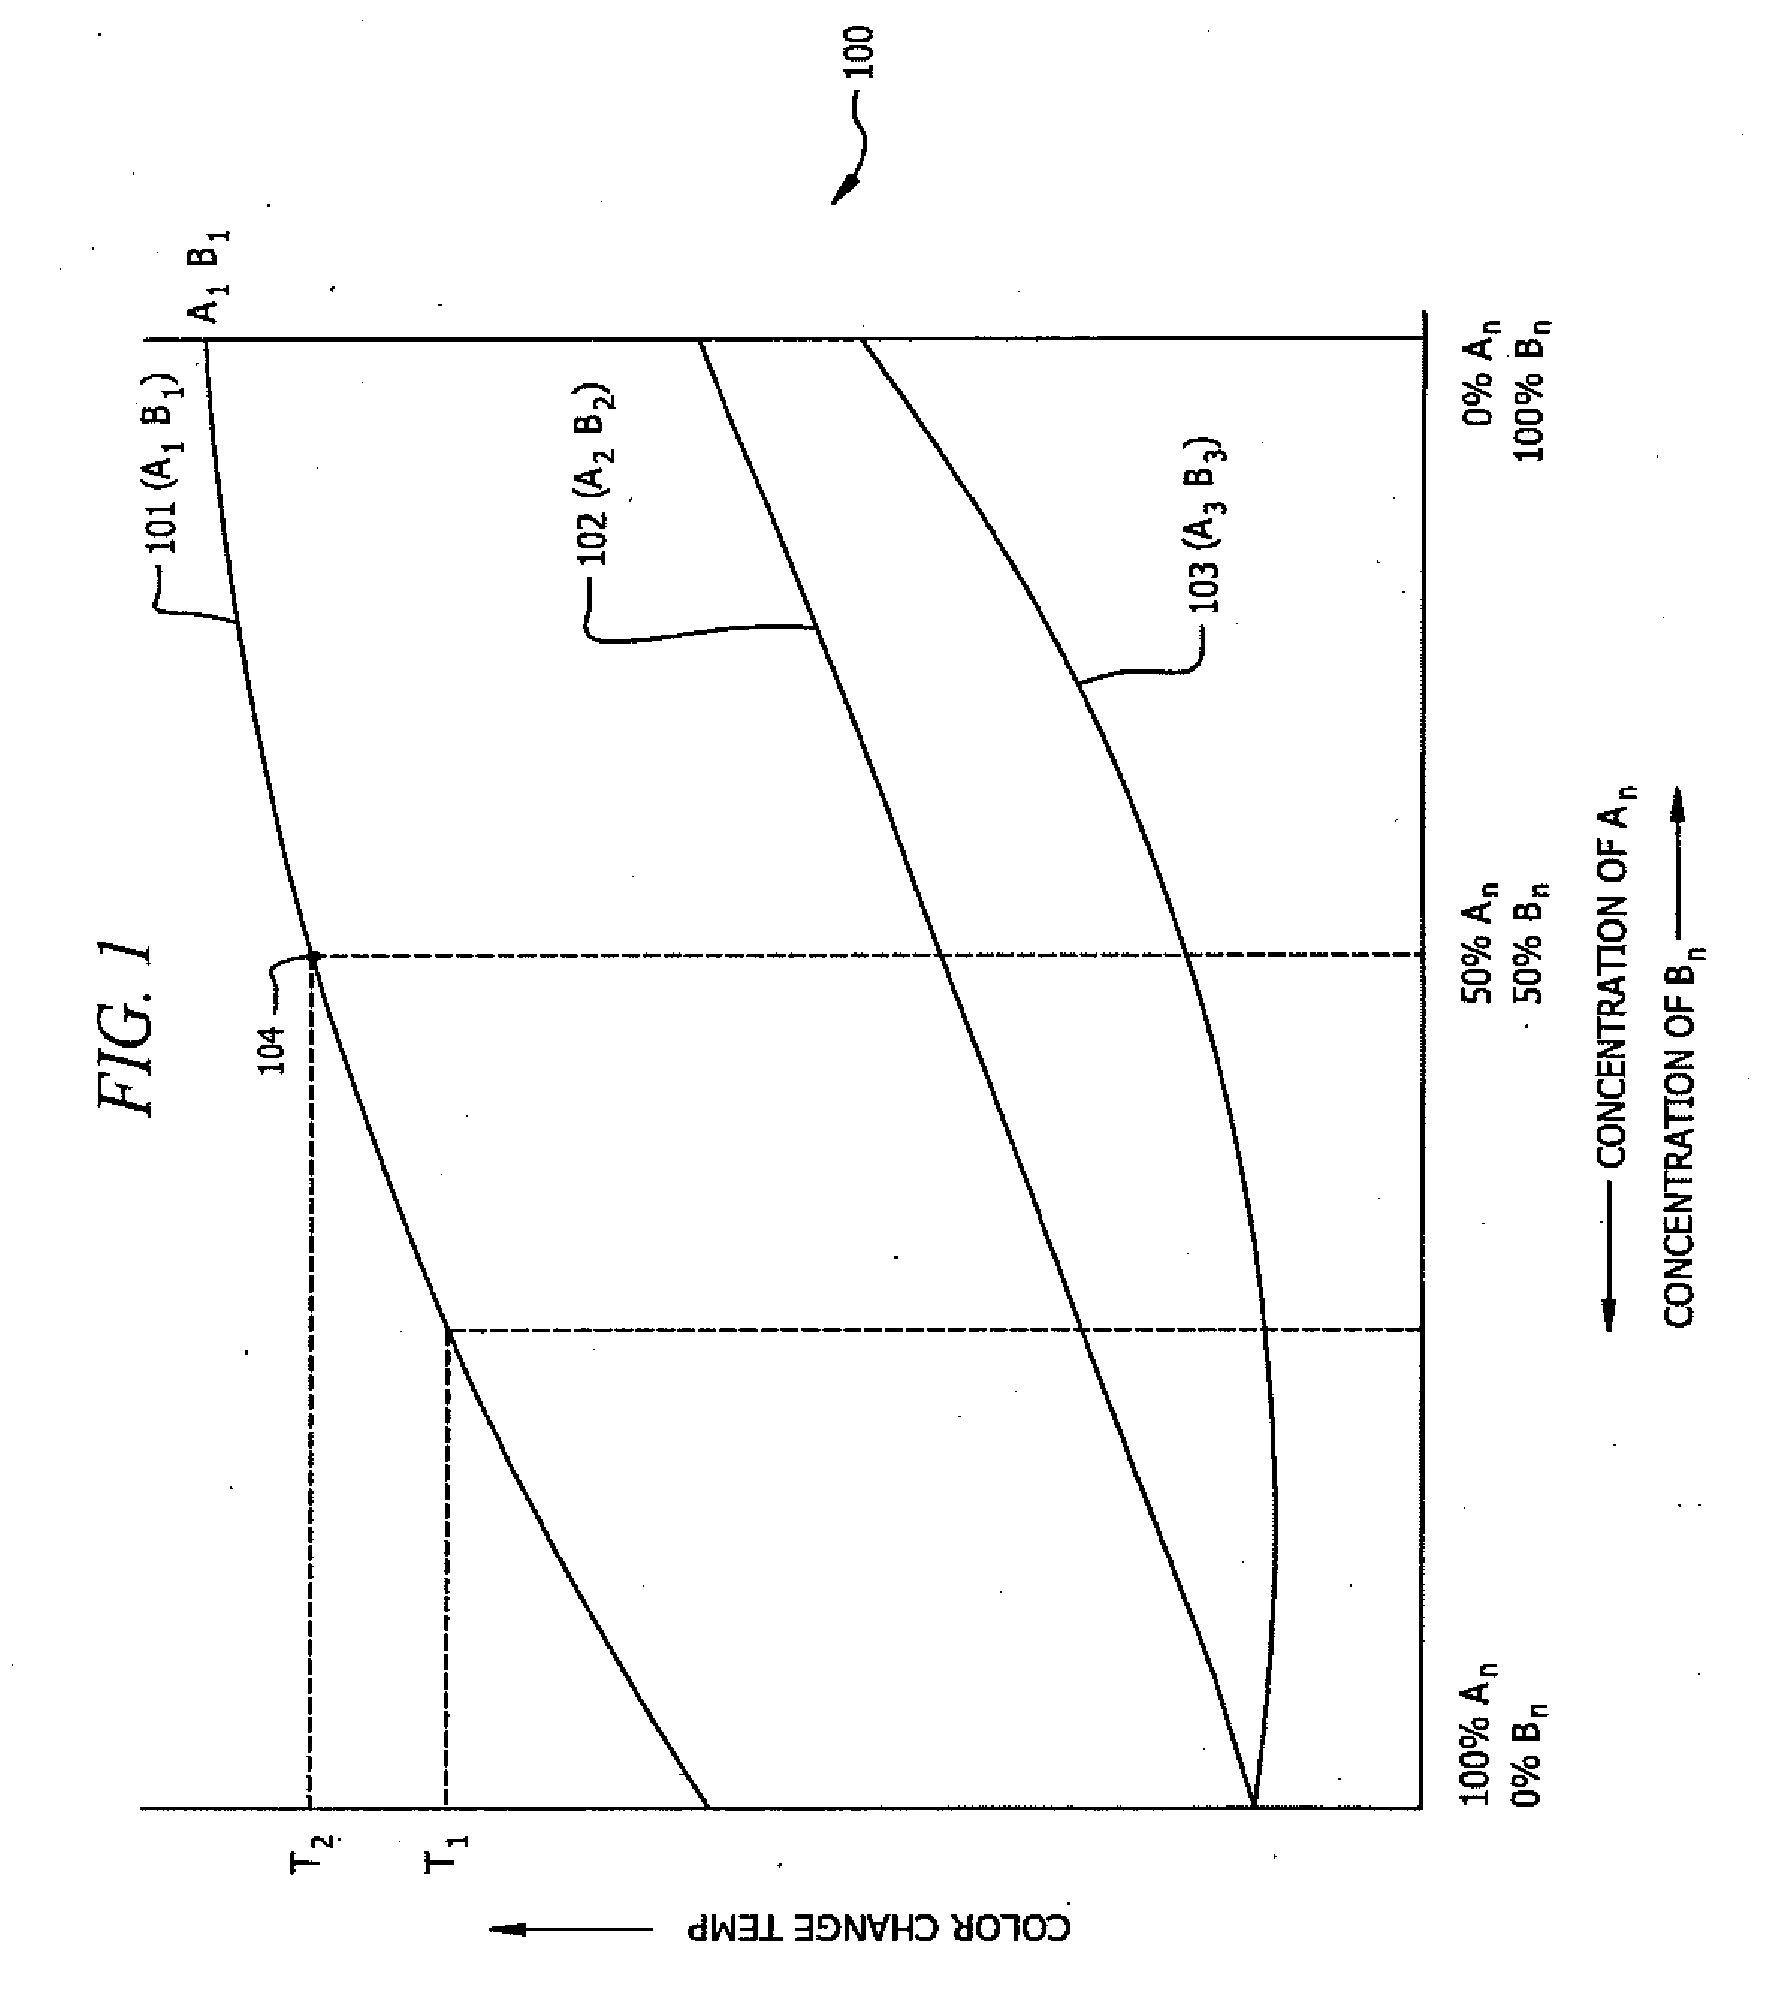 Co-Topo-Polymeric Compositions, Devices and Systems for Controlling Threshold and Delay Activation Sensitivities